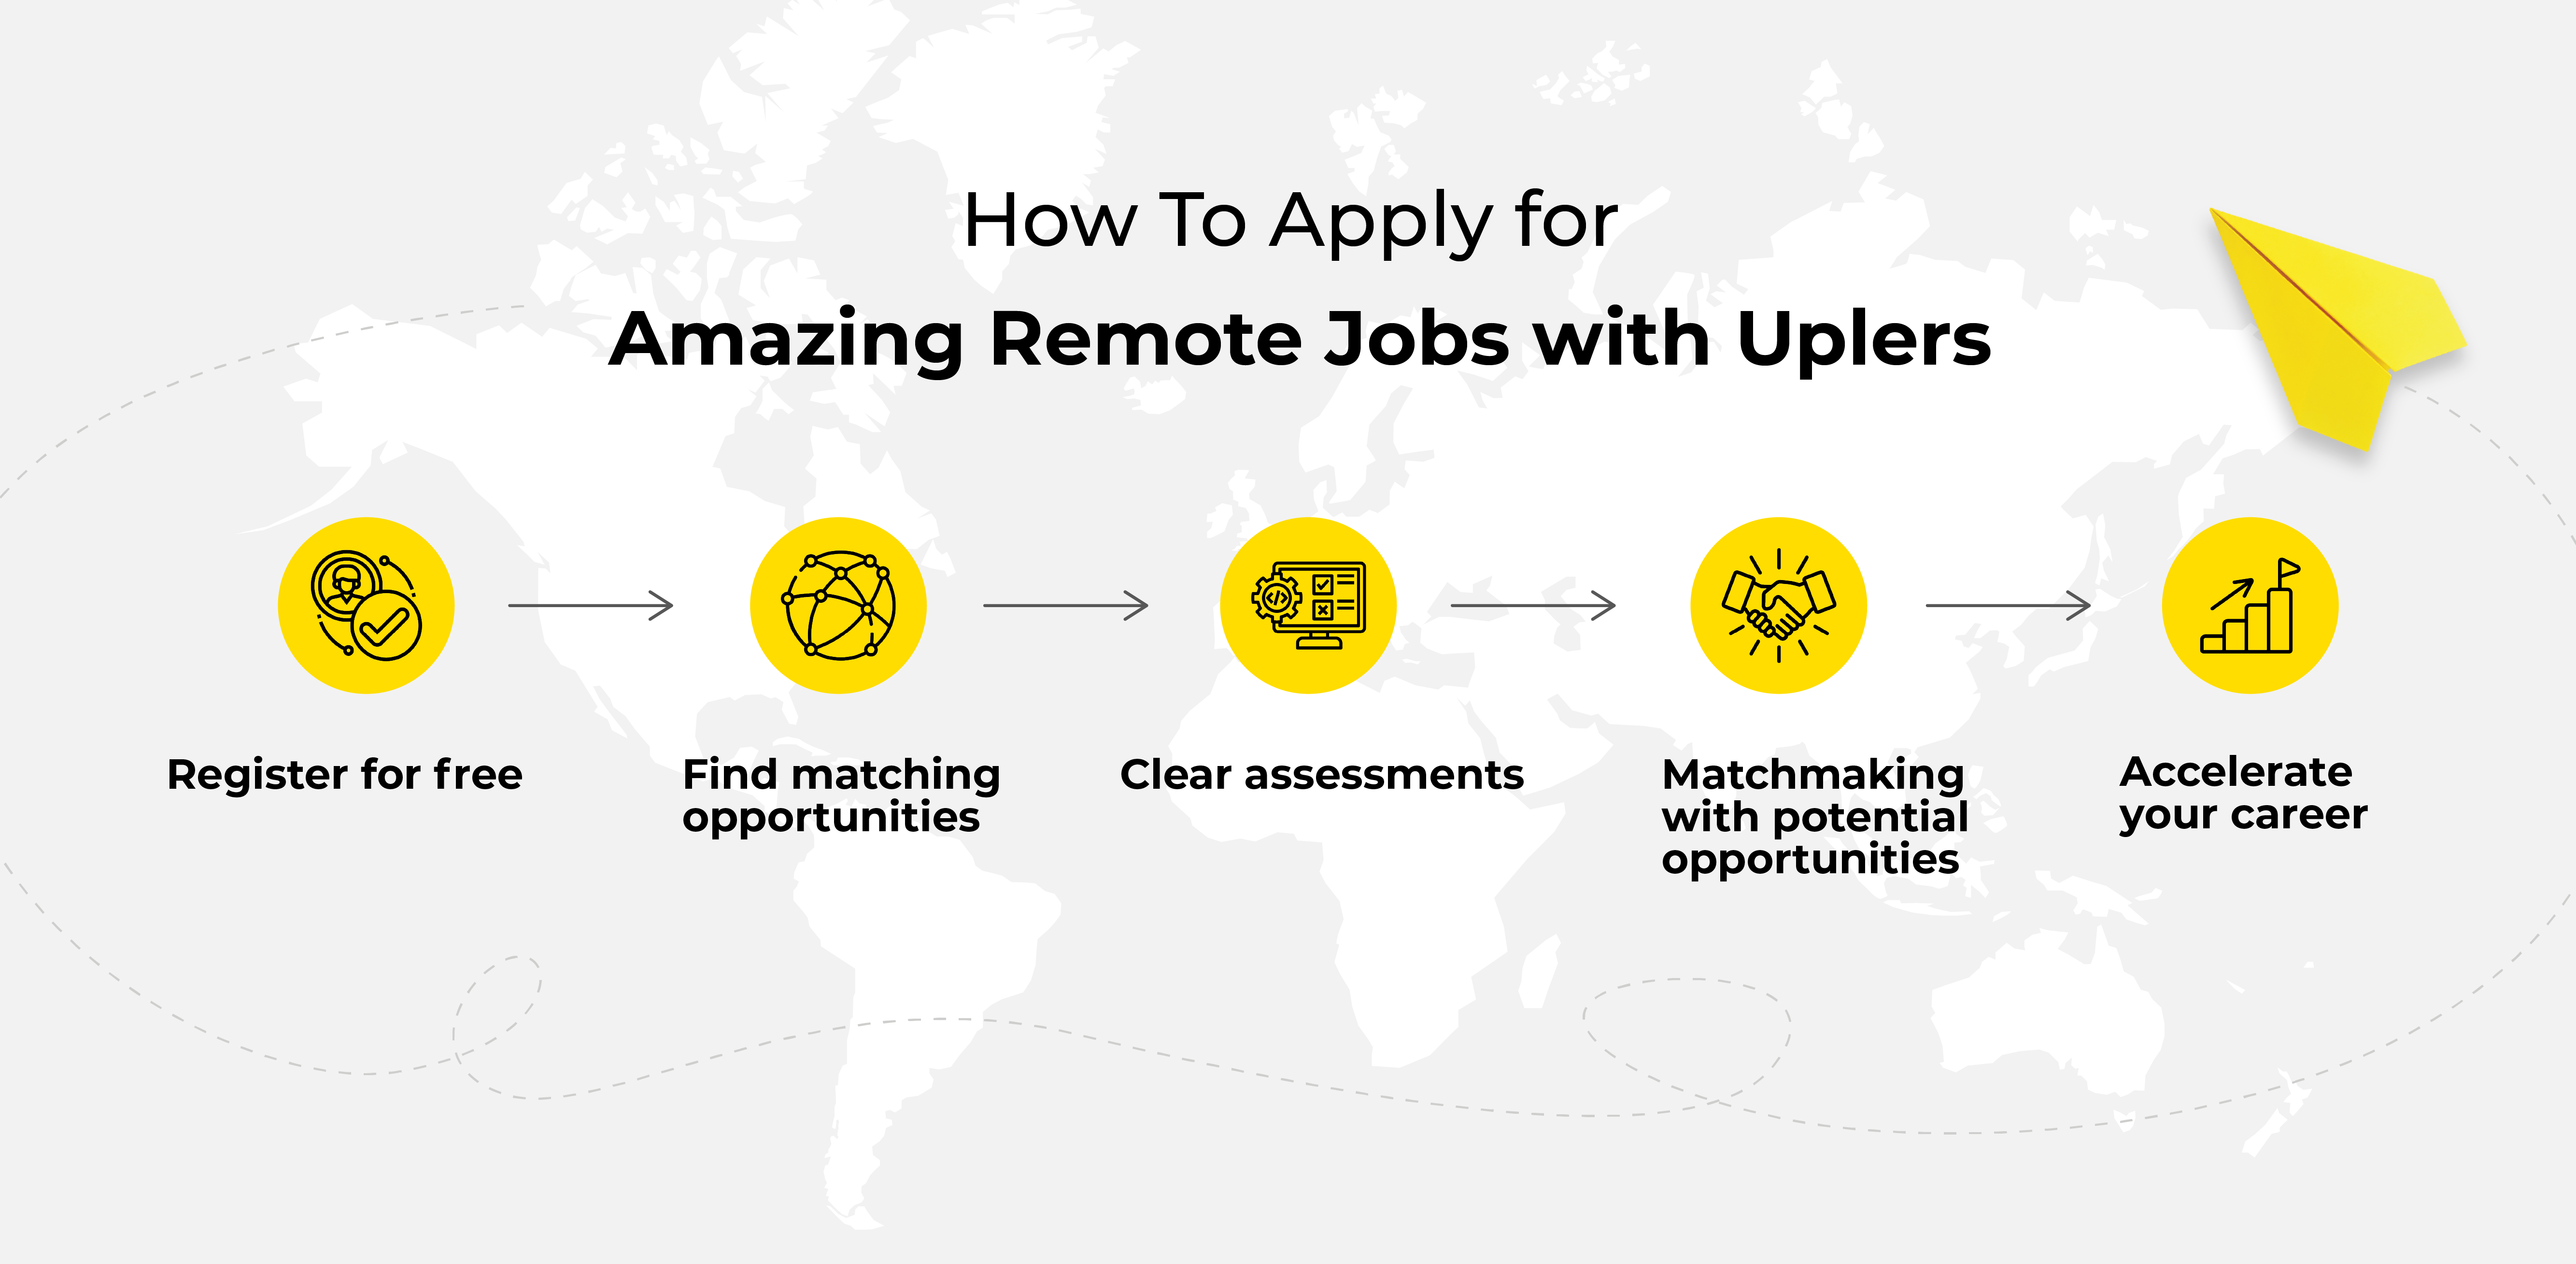 How to apply for amazing remote jobs with Uplers